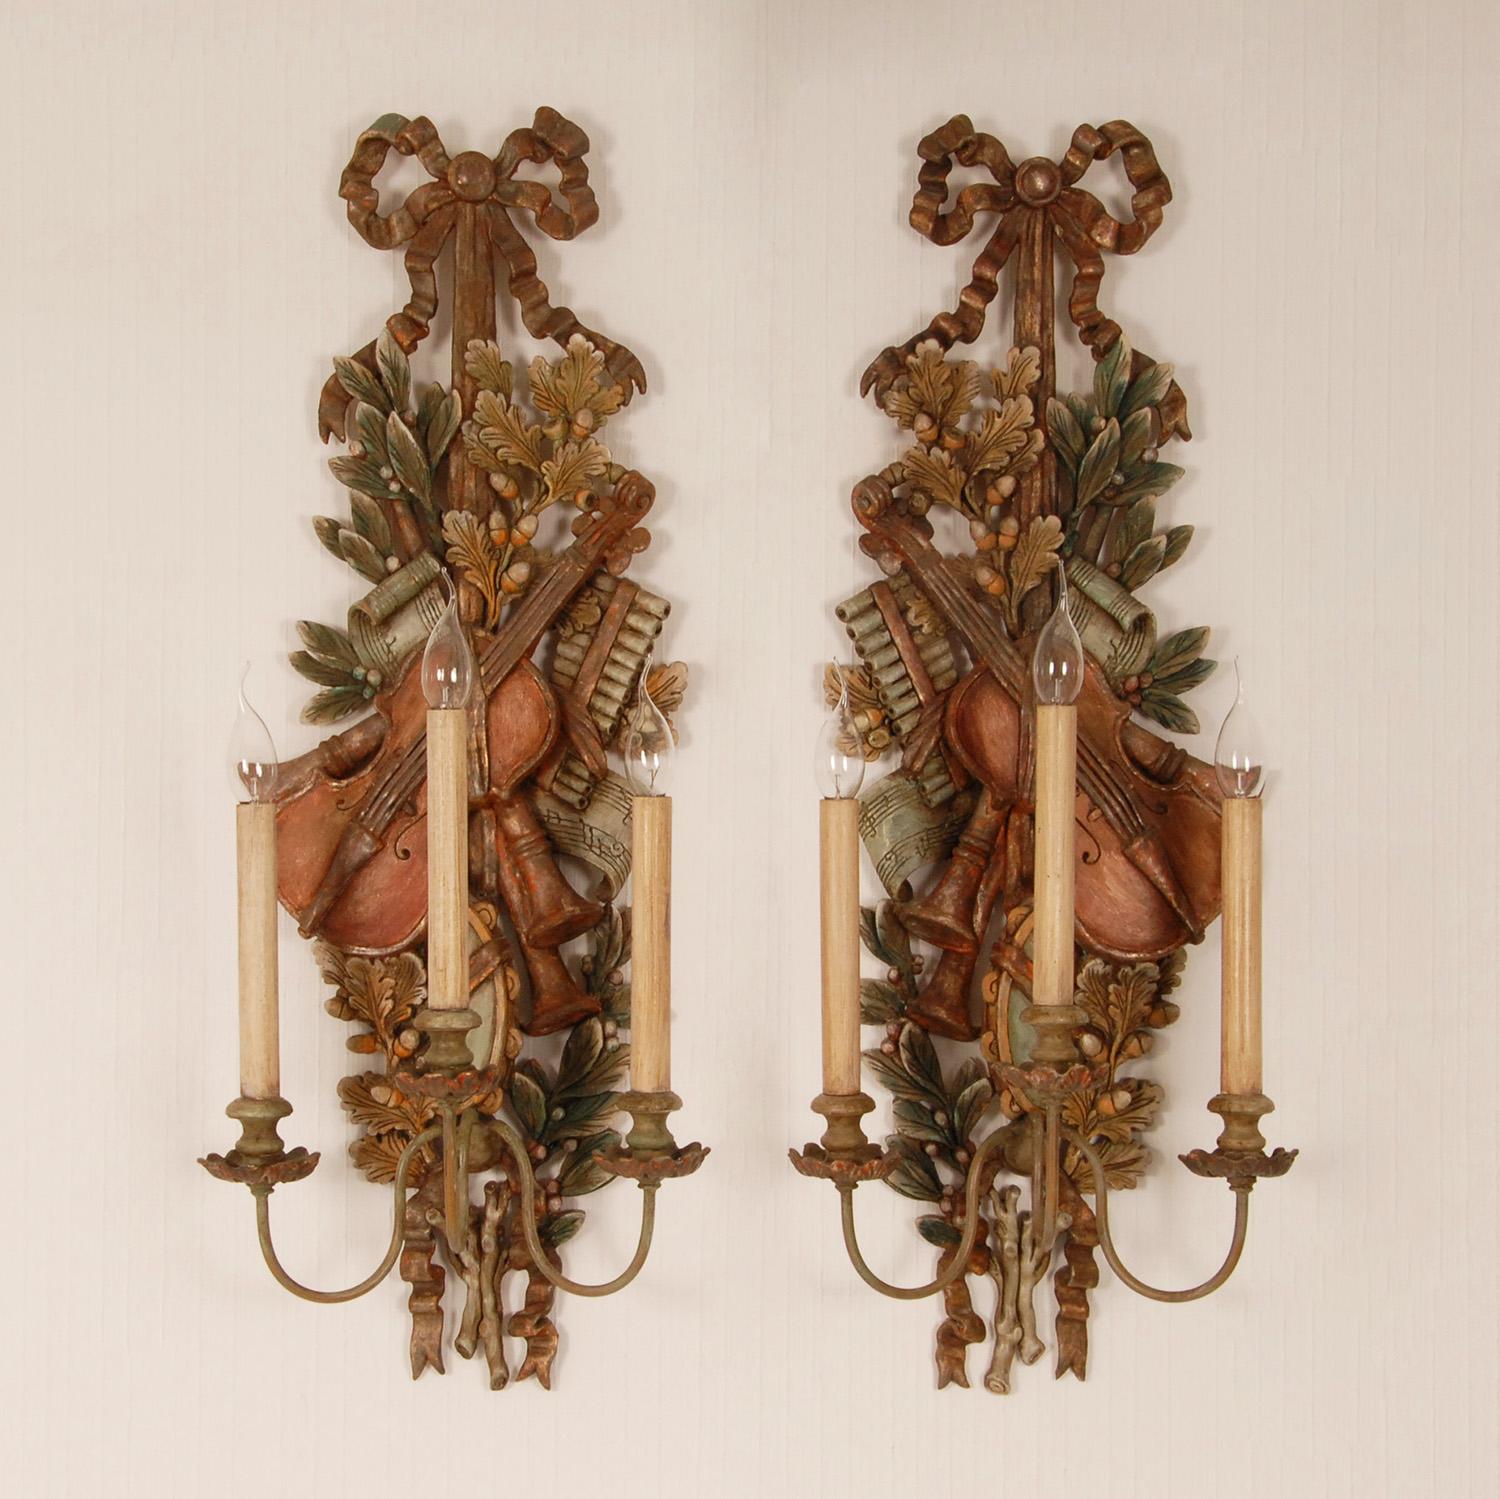 Neoclassical Vintage Italian Lamps Carved NeoClassical Music Trophies Wall Sconces a pair For Sale